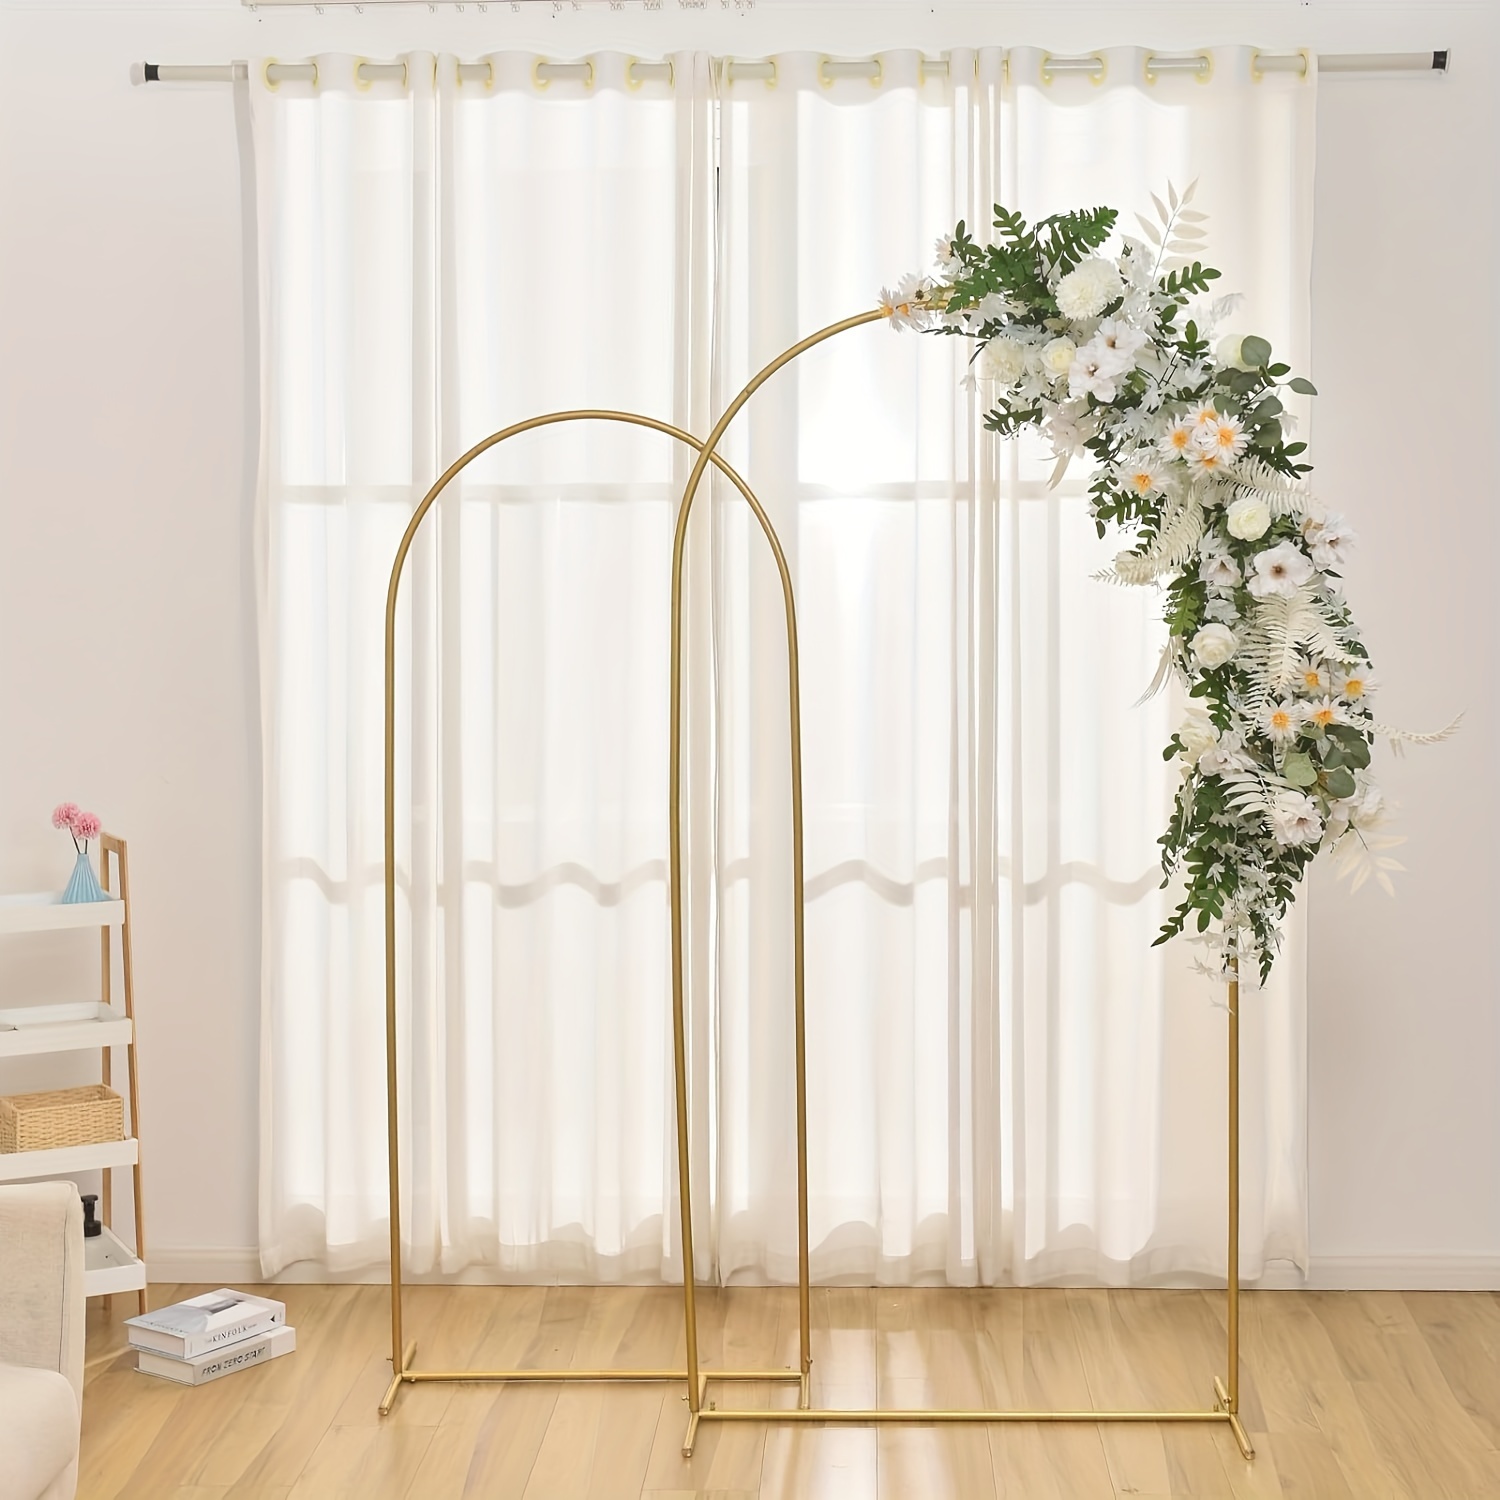 

Metal Wedding Arch Backdrop Stand Gold Ballon Arch Stand Set Of 2 For Birthday Party Wedding Ceremony Baby Shower Graduation Decoration, 70.8 And 78.7 Inch